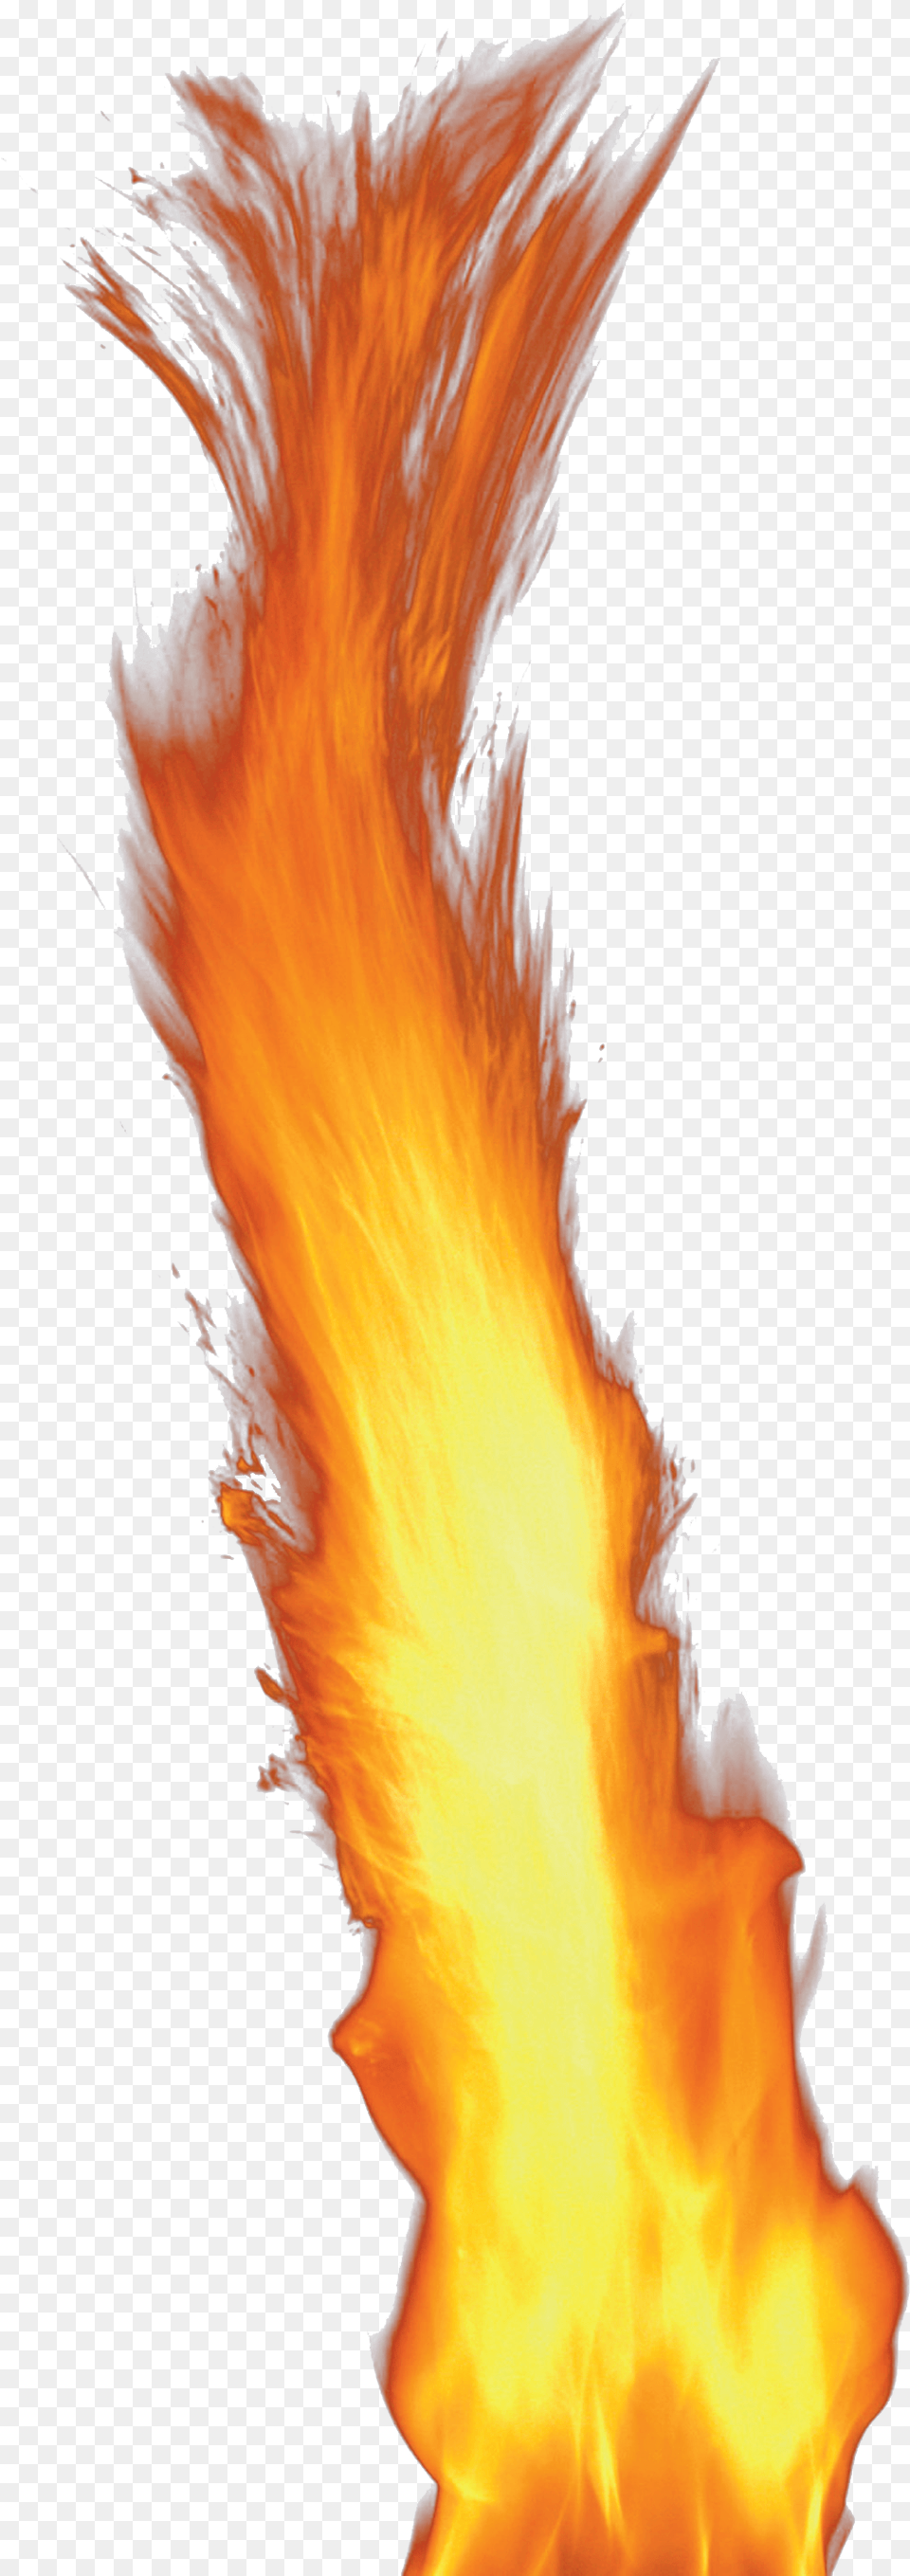 Nature Dnd 5e Skin Kite, Fire, Flame, Person Png Image